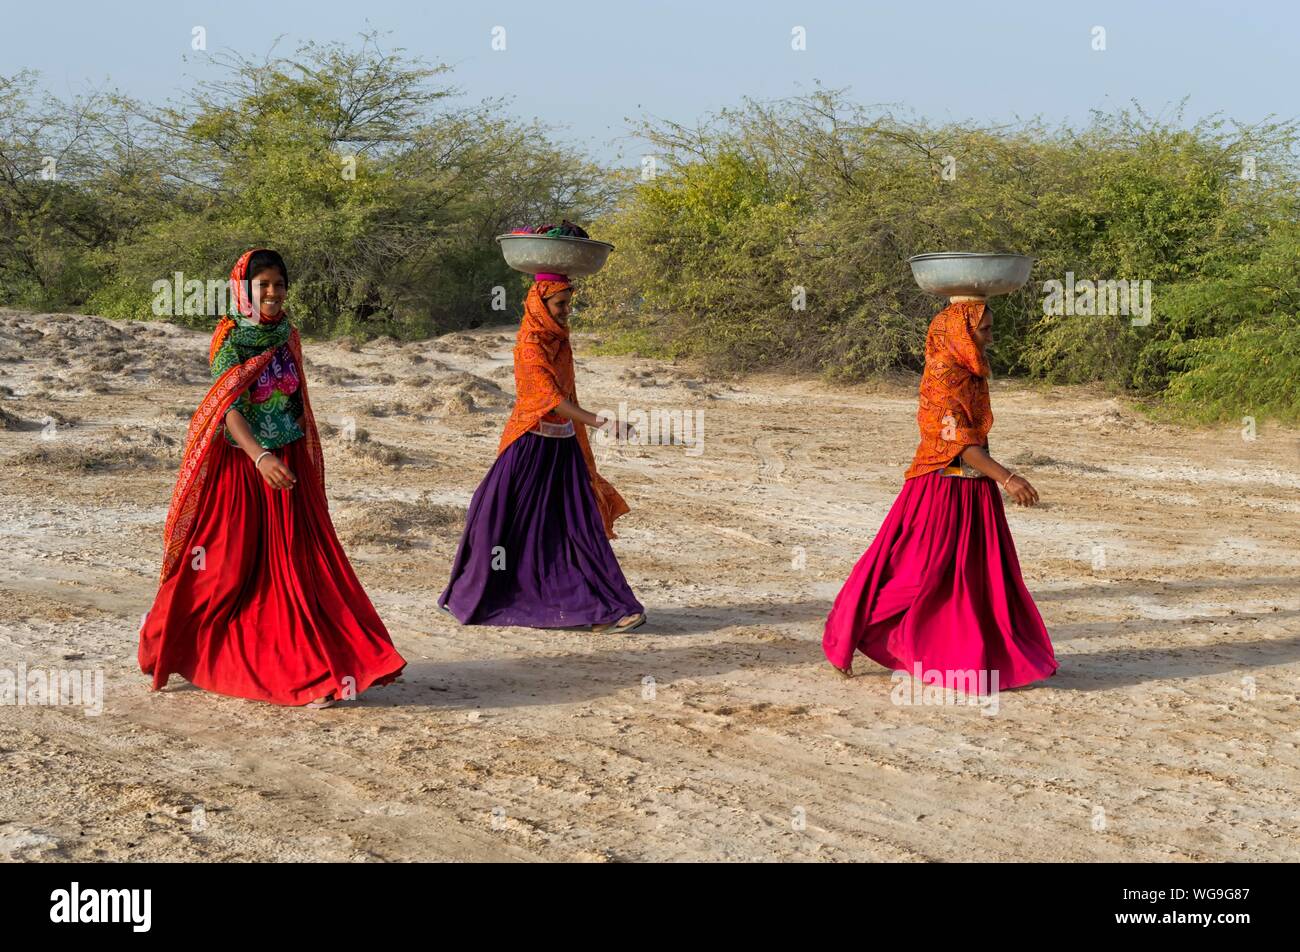 Fakirani women in traditional colorful clothes walking in the